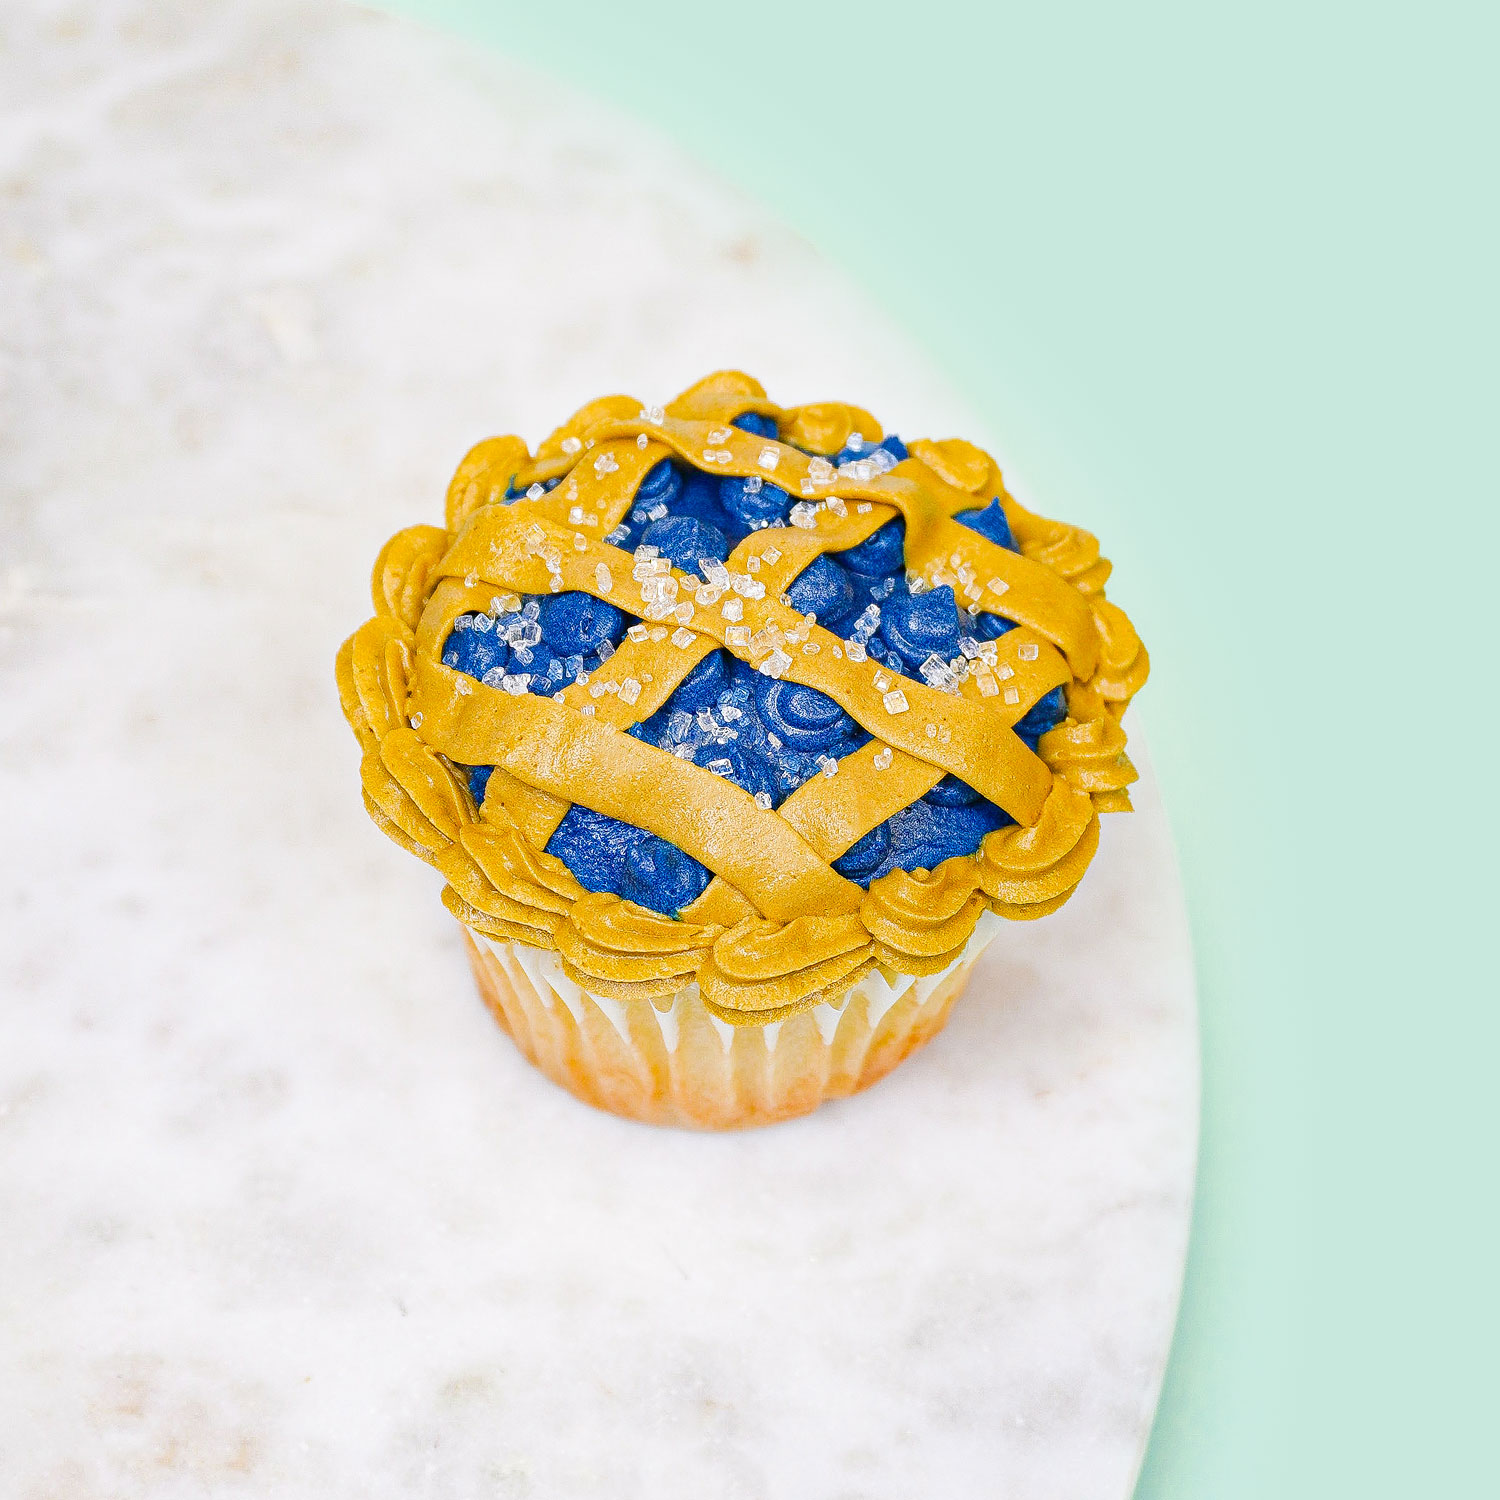 cupcake decorated to look like a blueberry lattice pie